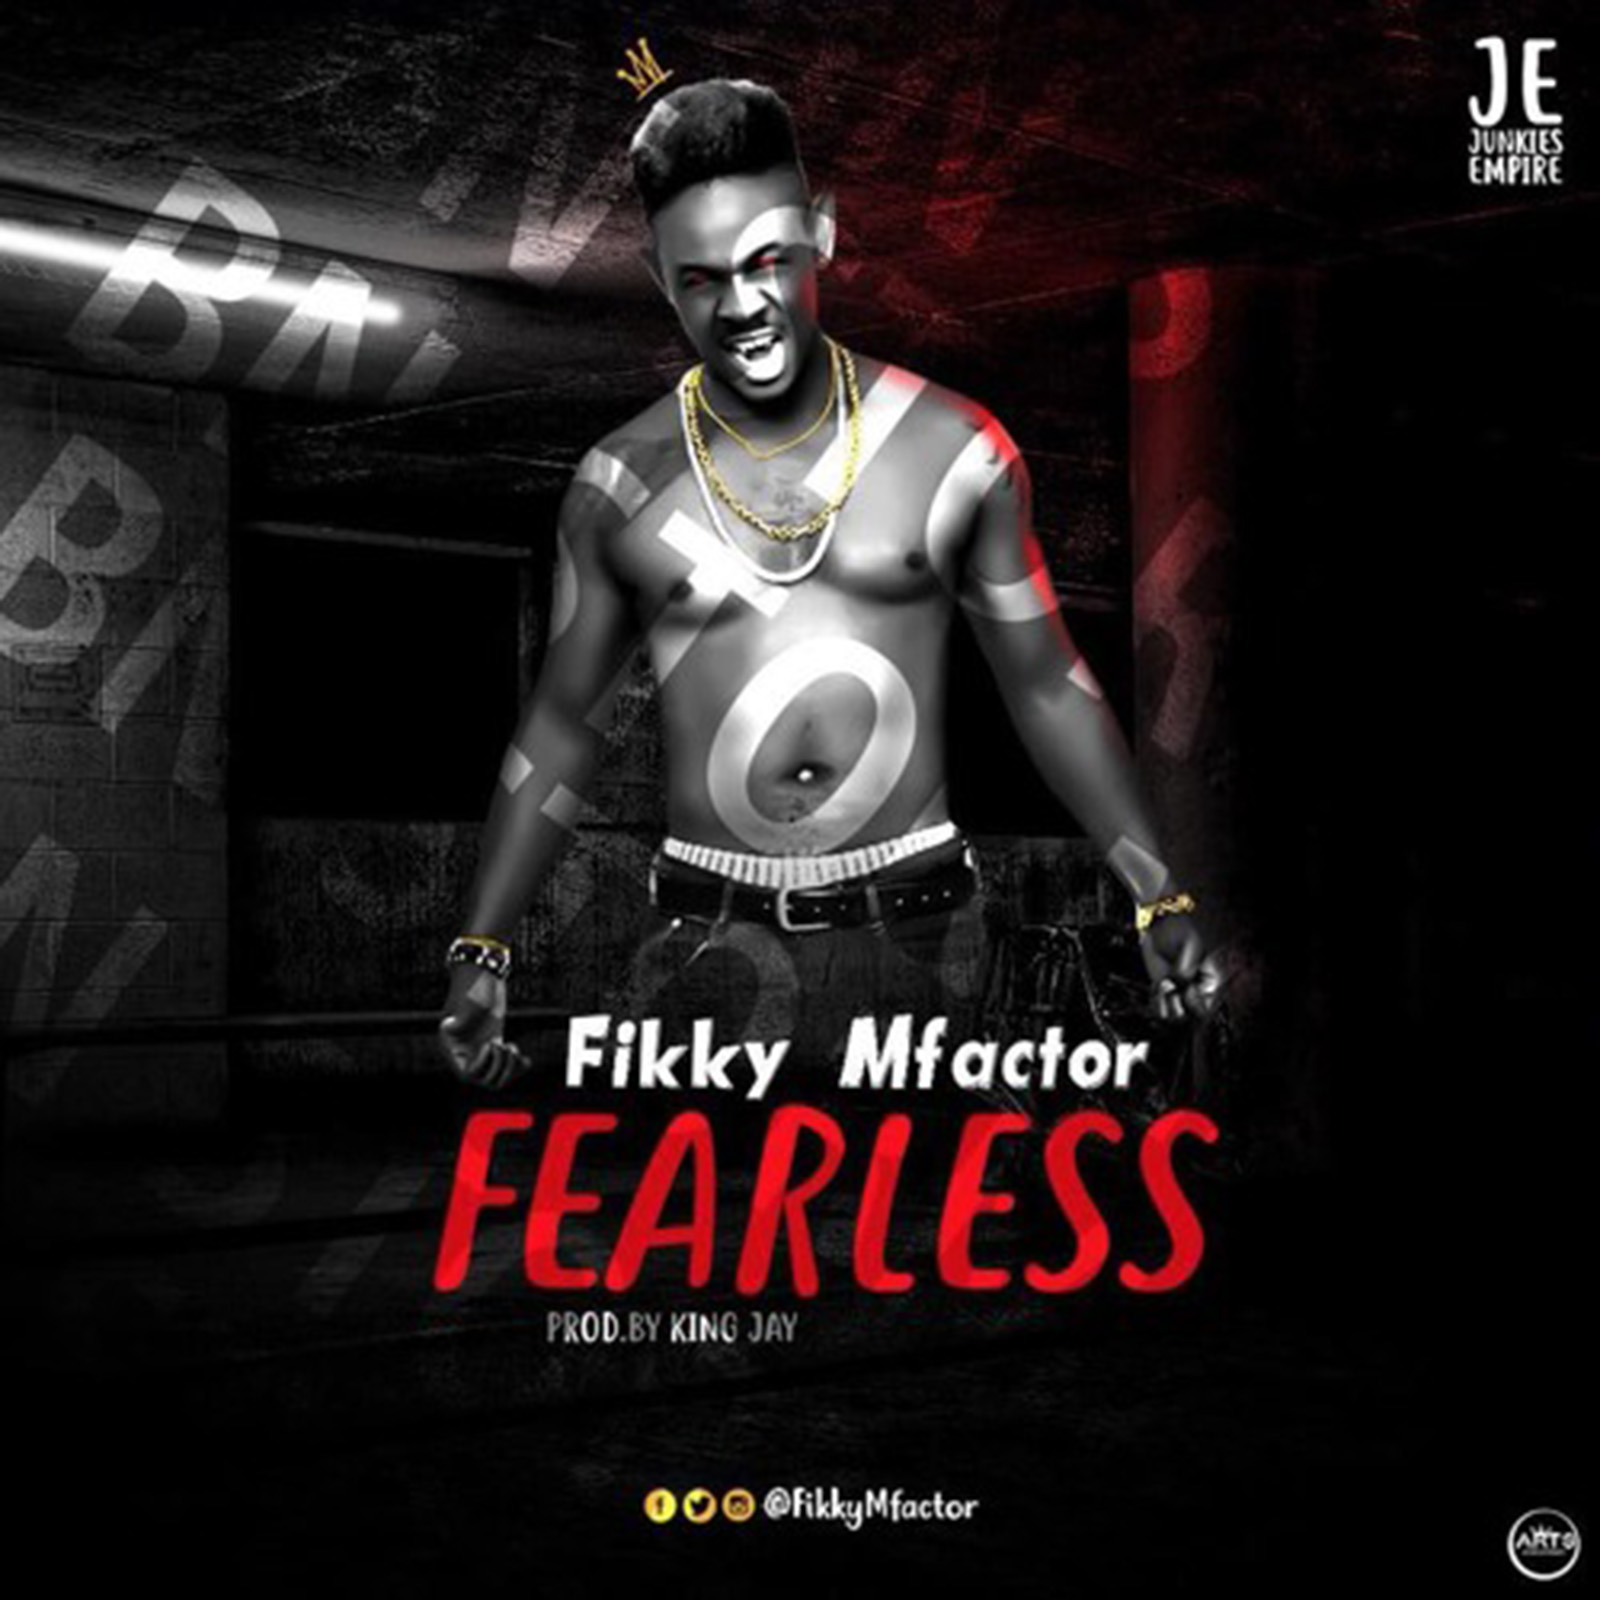 Fearless by Fikky Mfactor